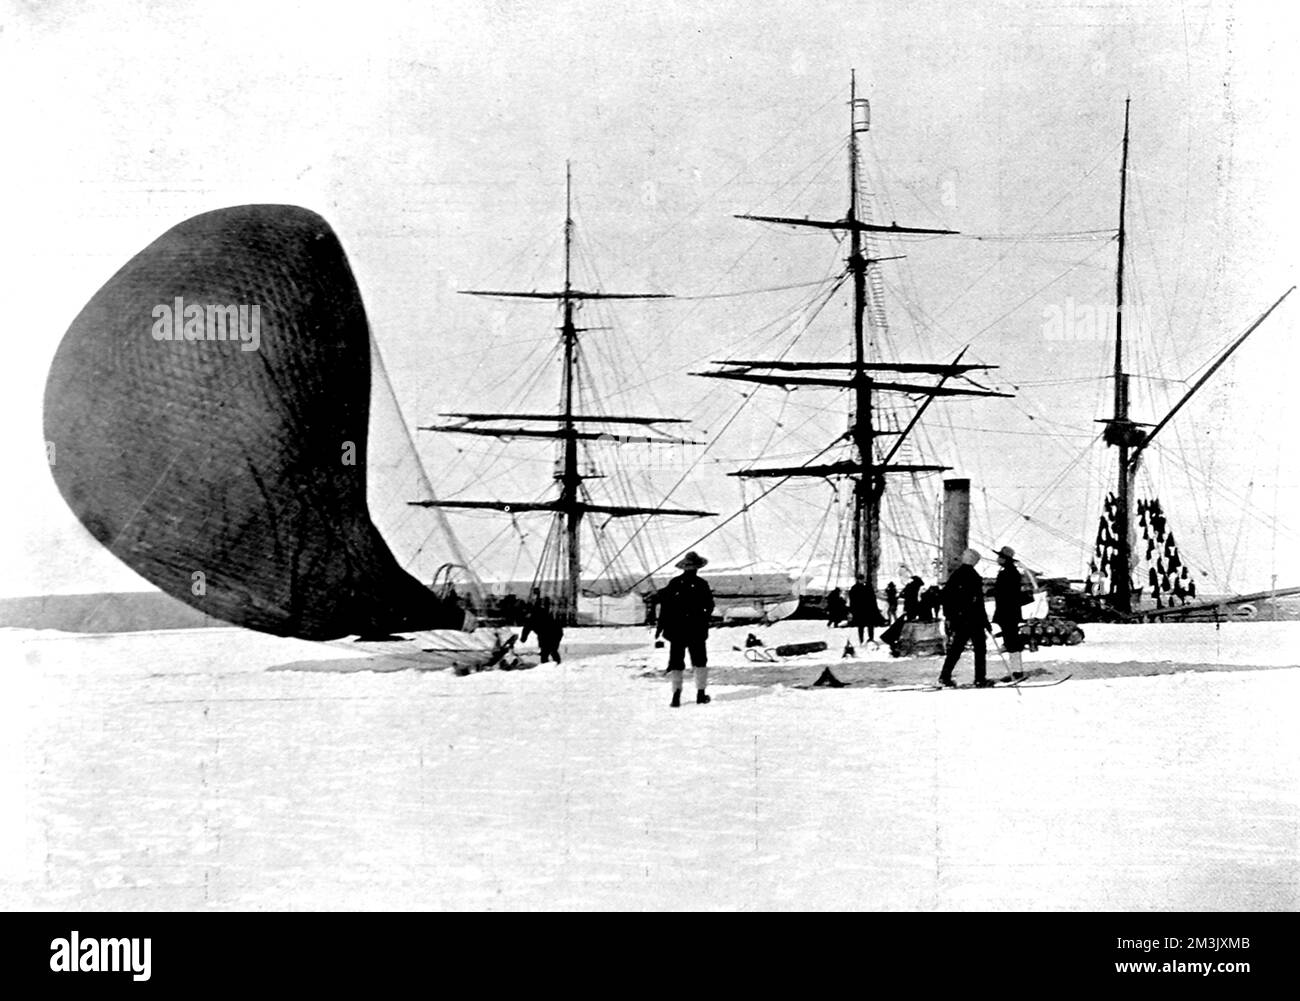 Photograph showing members of the National Antarctic Expedition of 1901-4 deflating an hydrogen balloon, with the Polar Research Ship 'Discovery' in the background, Antarctic, 4th February 1902.  This was the end of the very first balloon flight, to a height of 750 feet, undertaken in the Antarctic.     Date: 1903 Stock Photo